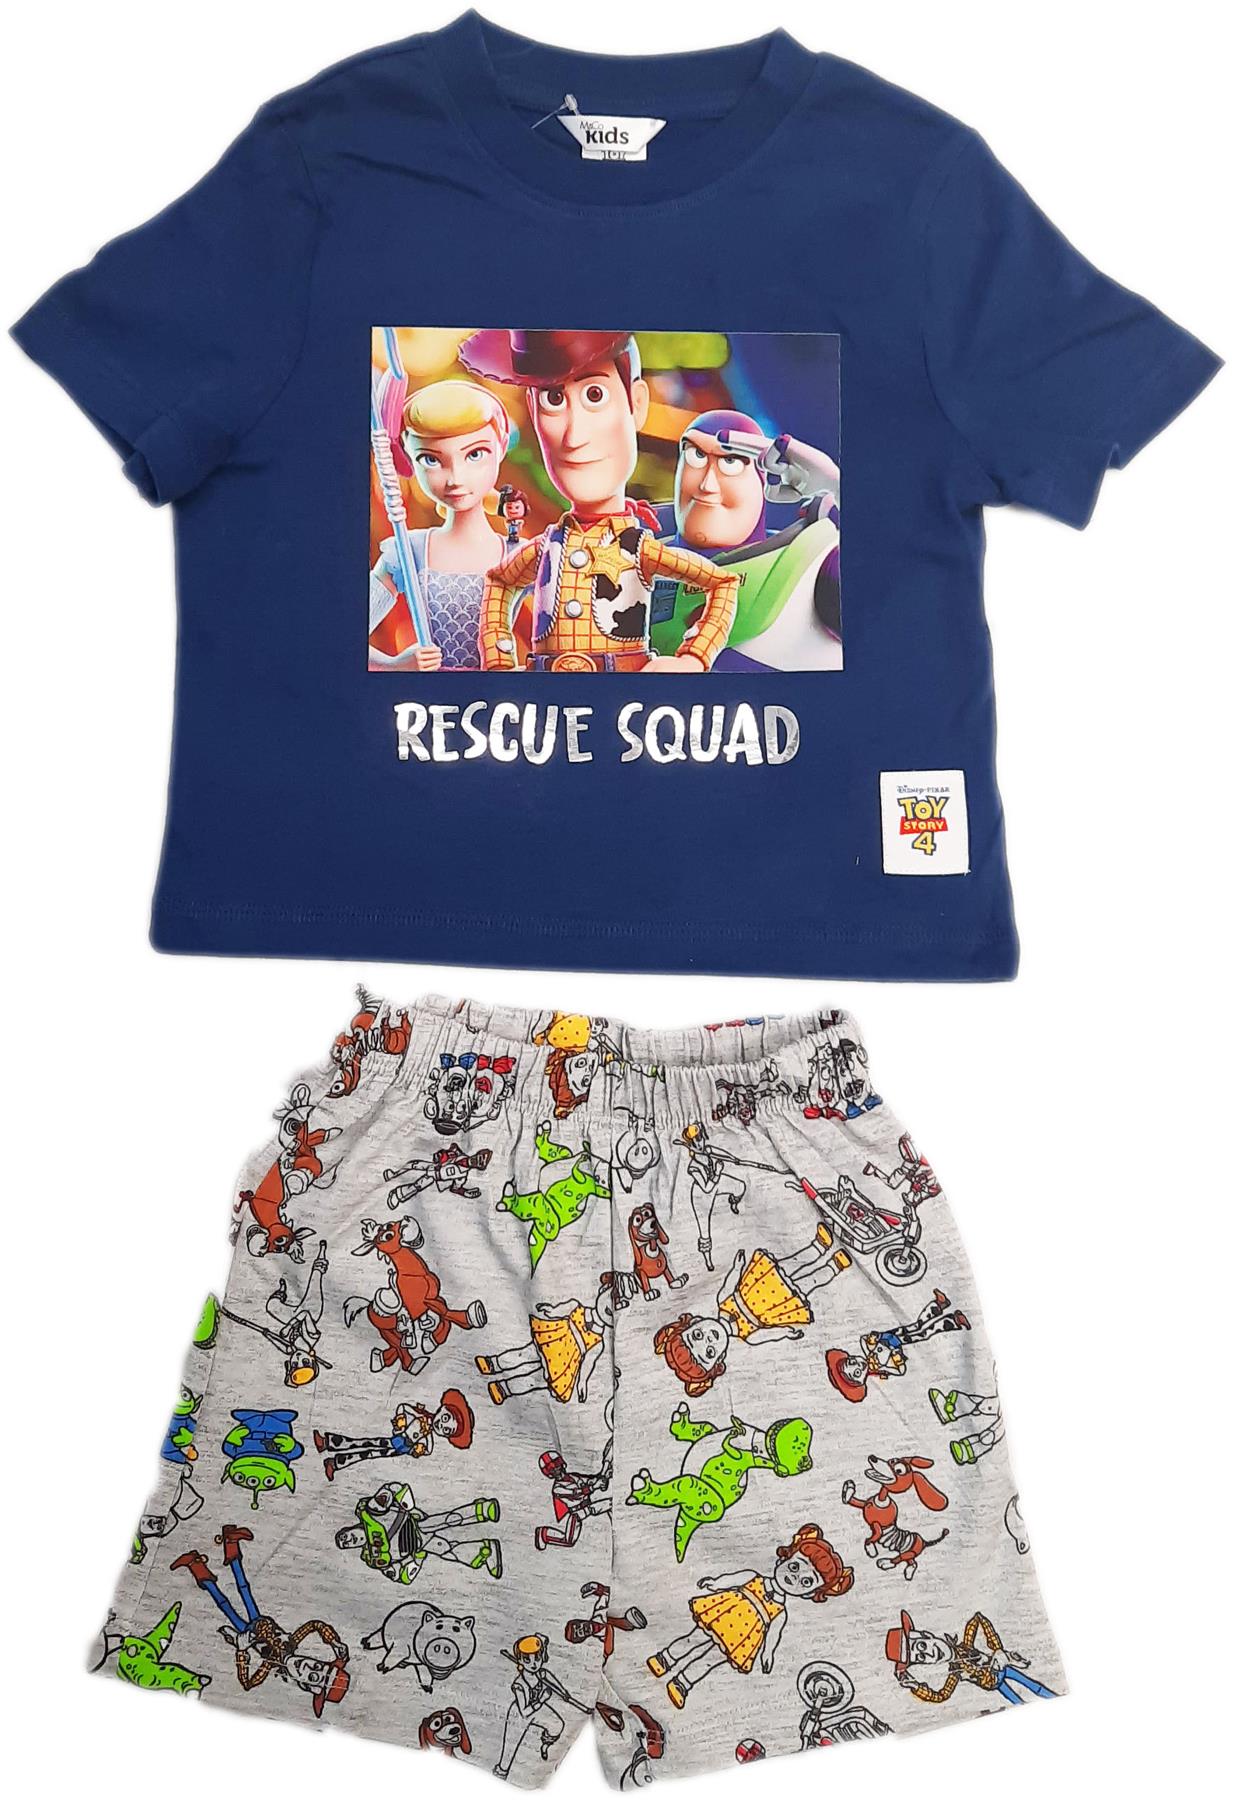 Latest Ex Chainstore Toy Story Boys Blue Shorts Set Nightwear With Woody, Buzz Lighter